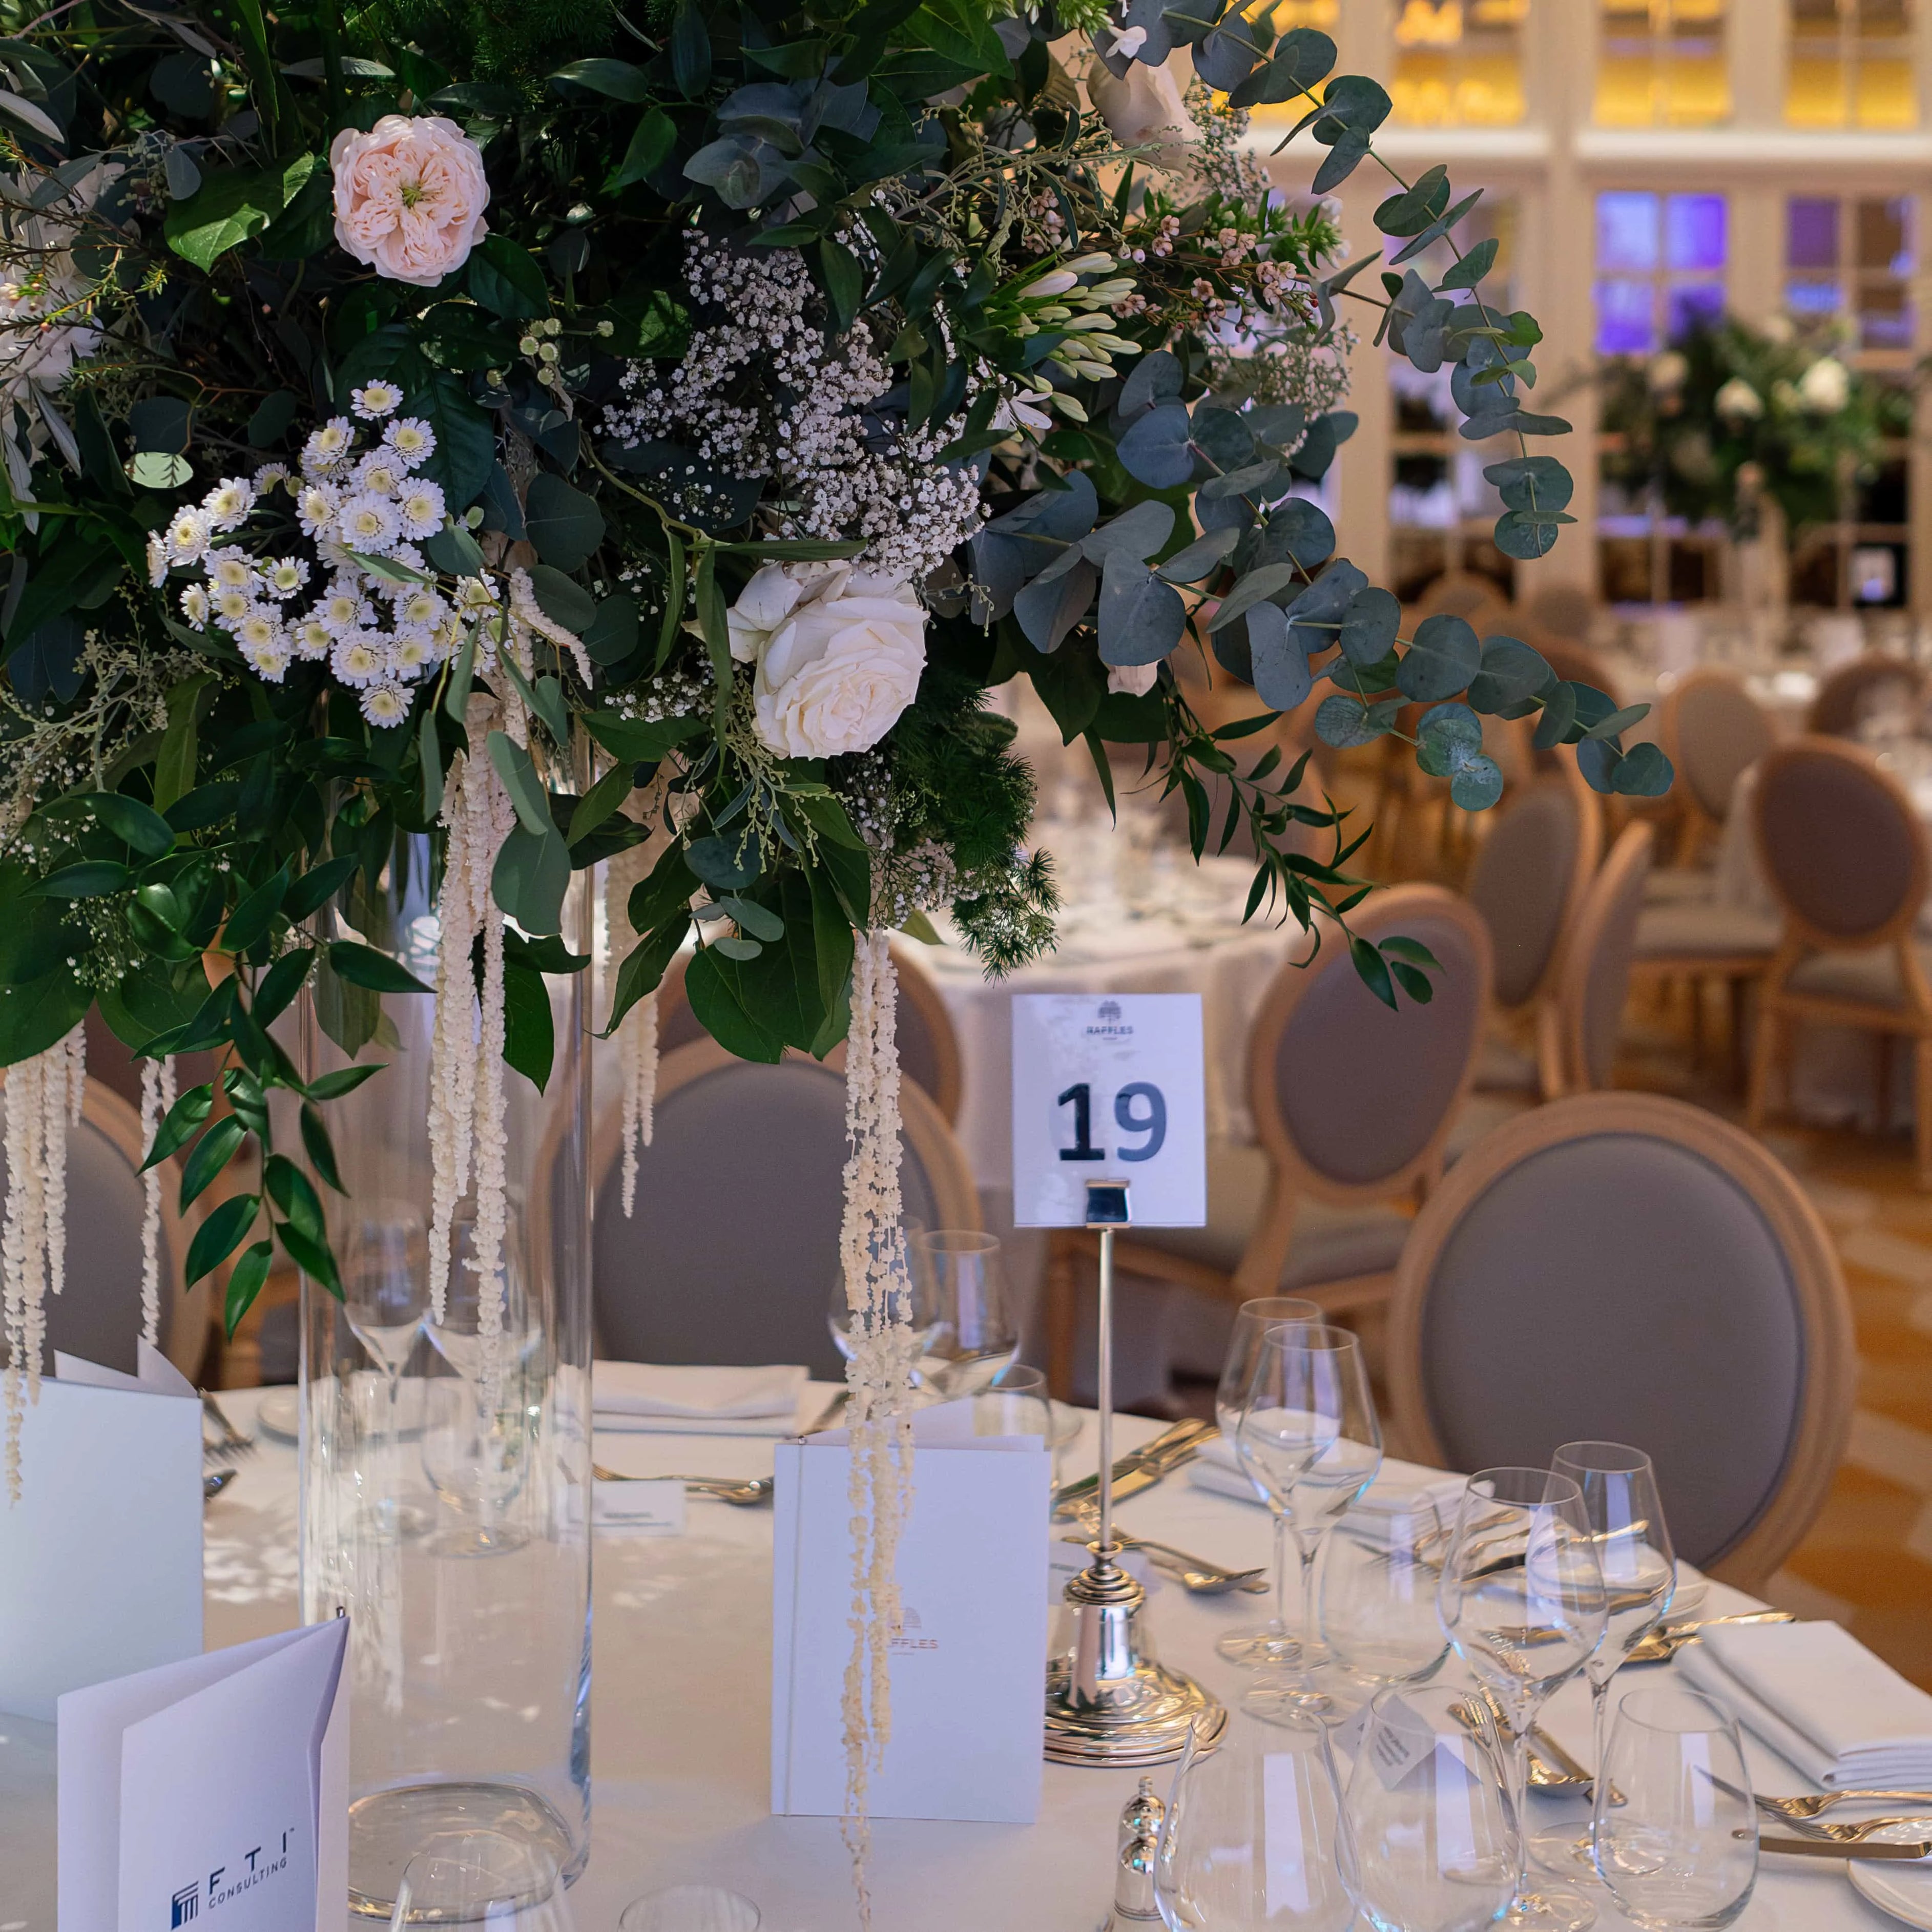 This is a photo of an exquisite floral arrangement by Amaranté London on a table at the FTI Consulting corporate event. The arrangement features delicate roses and cascading greens, with dangling accents adding a touch of luxury and whimsical sophistication.